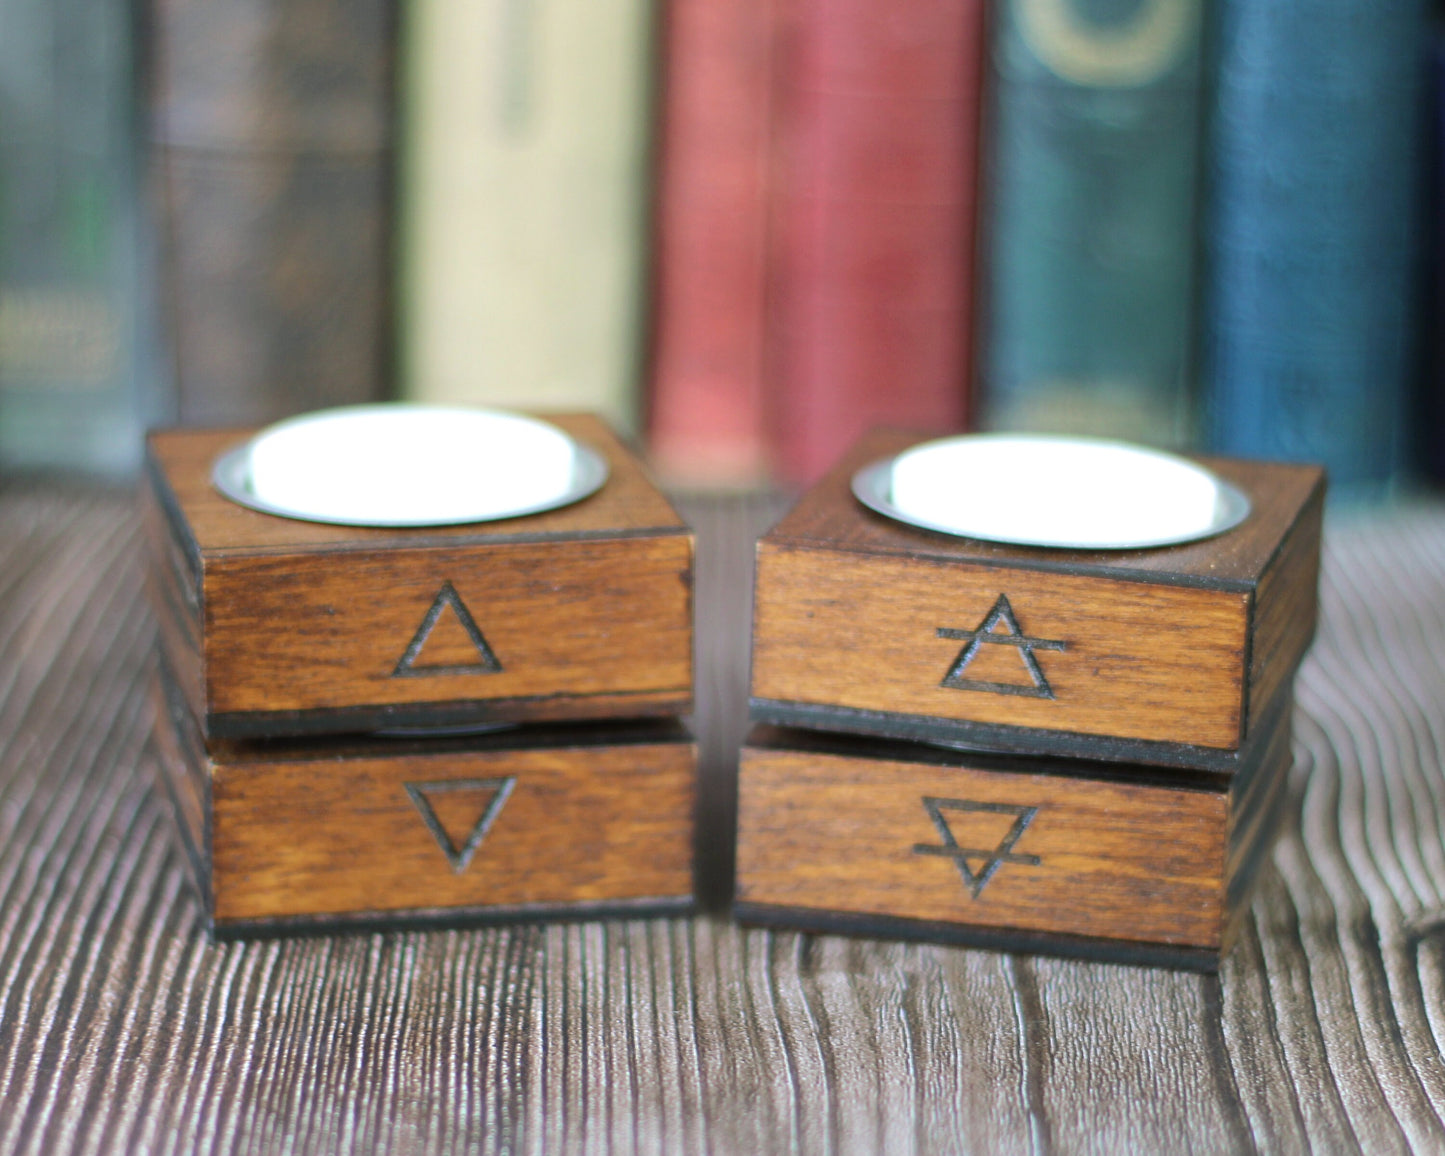 Wooden Wicca Elemental Candle Holders for Wiccan or Pagan Altar